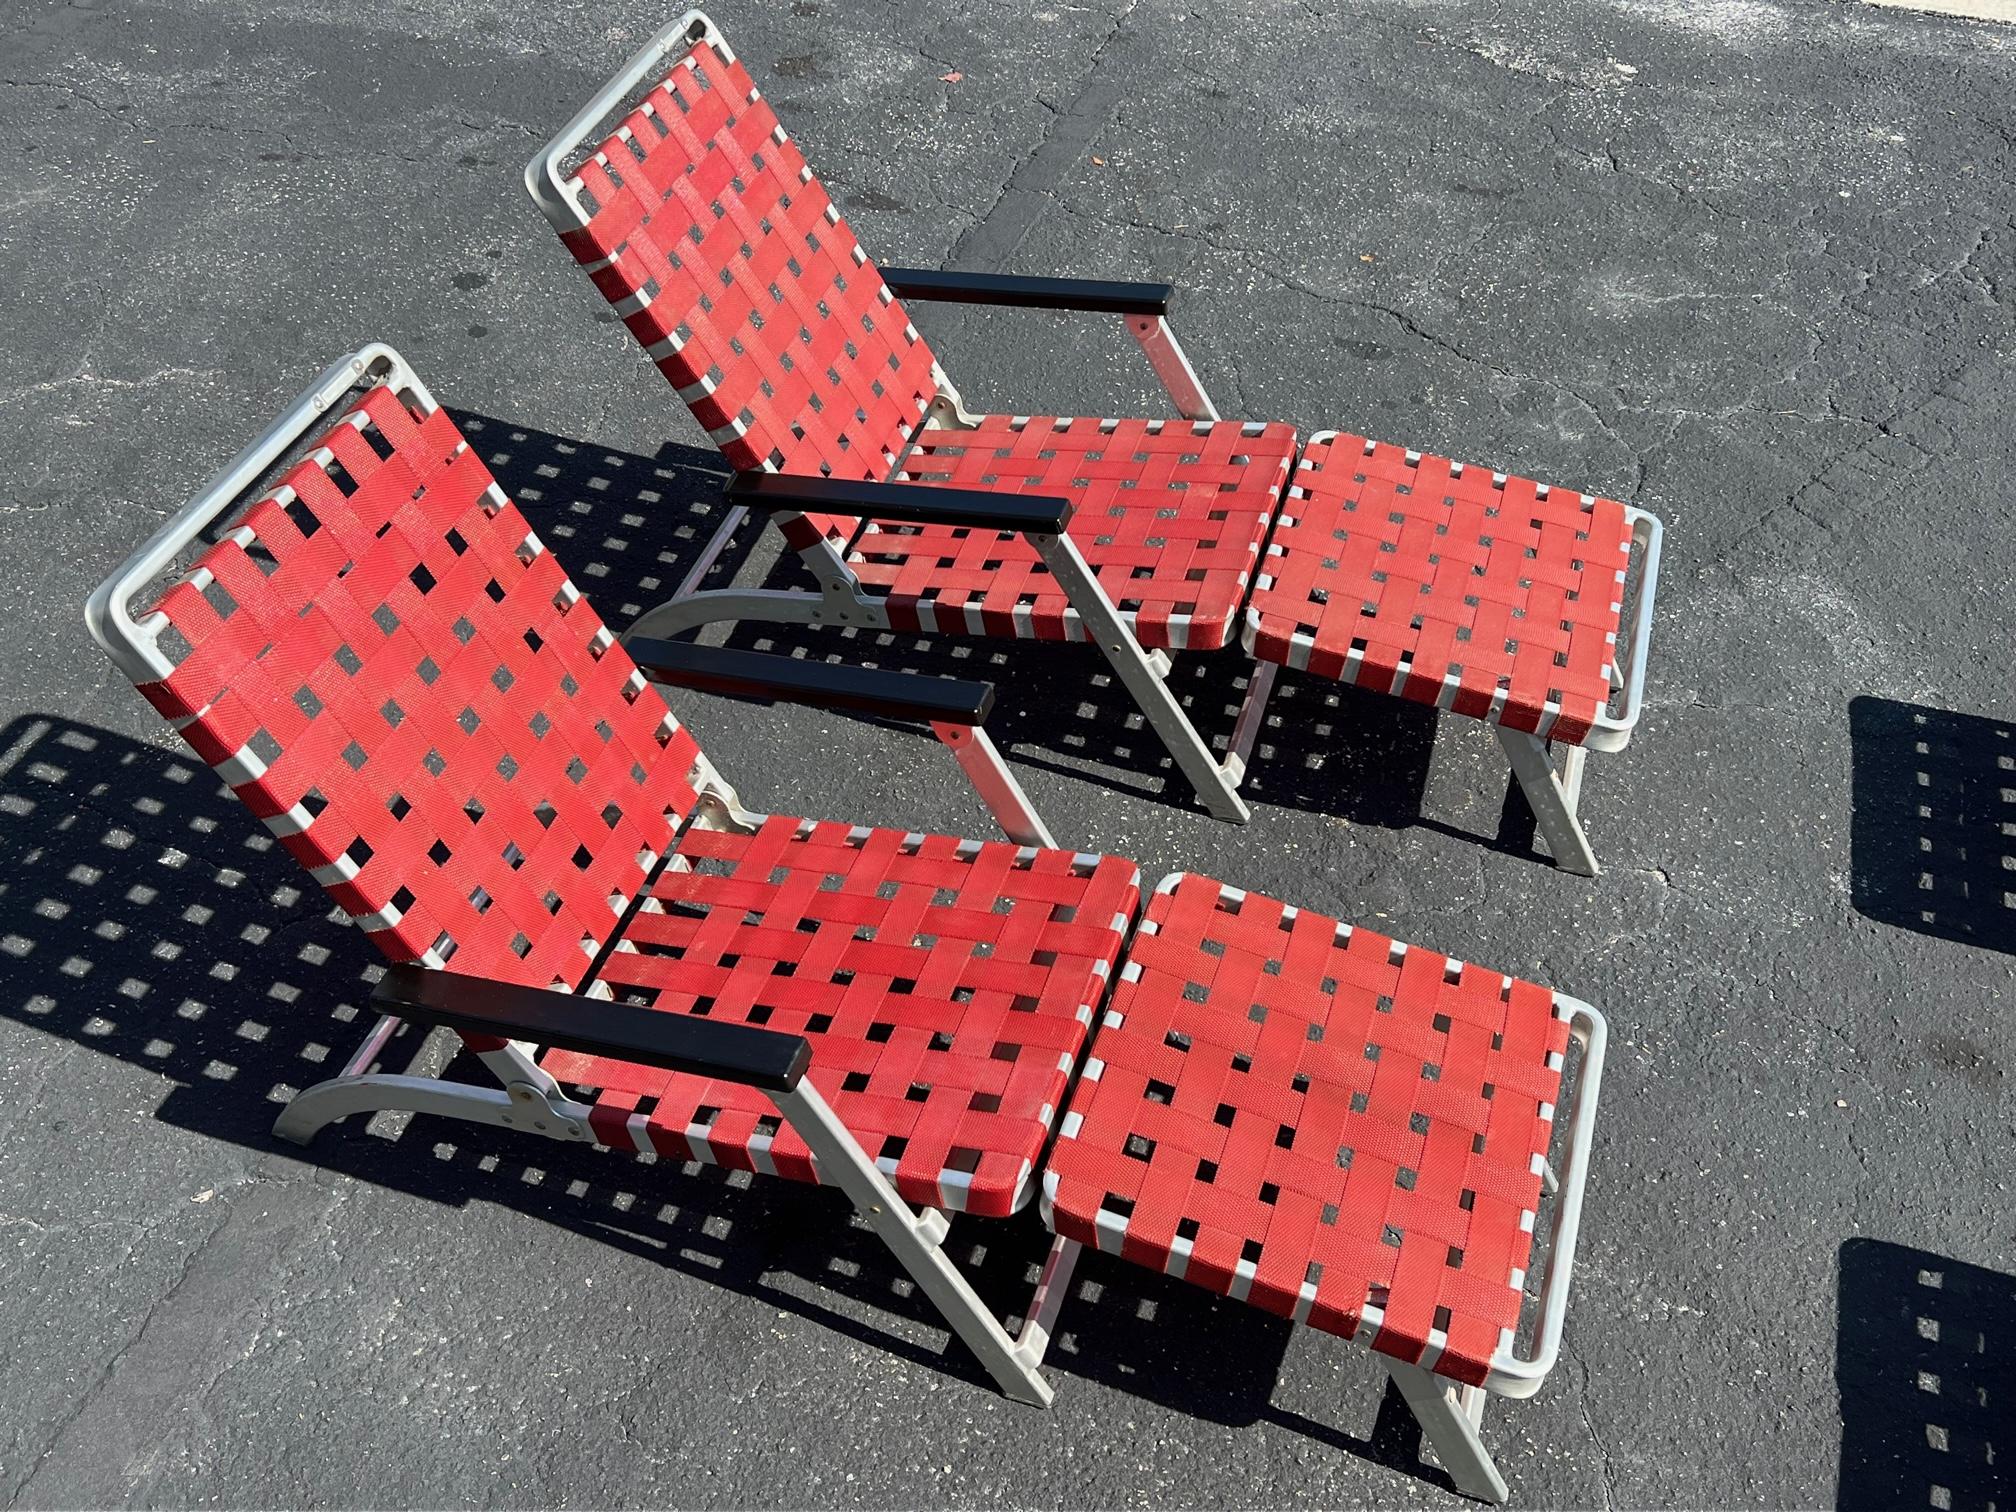 A pair of rare aluminum chaise lounges from famed luxury liner SS United States, ca' 1950's. Interesting folding design, red plastic straps. A total of four available. Priced $1,900 each or $3,500 per pair.